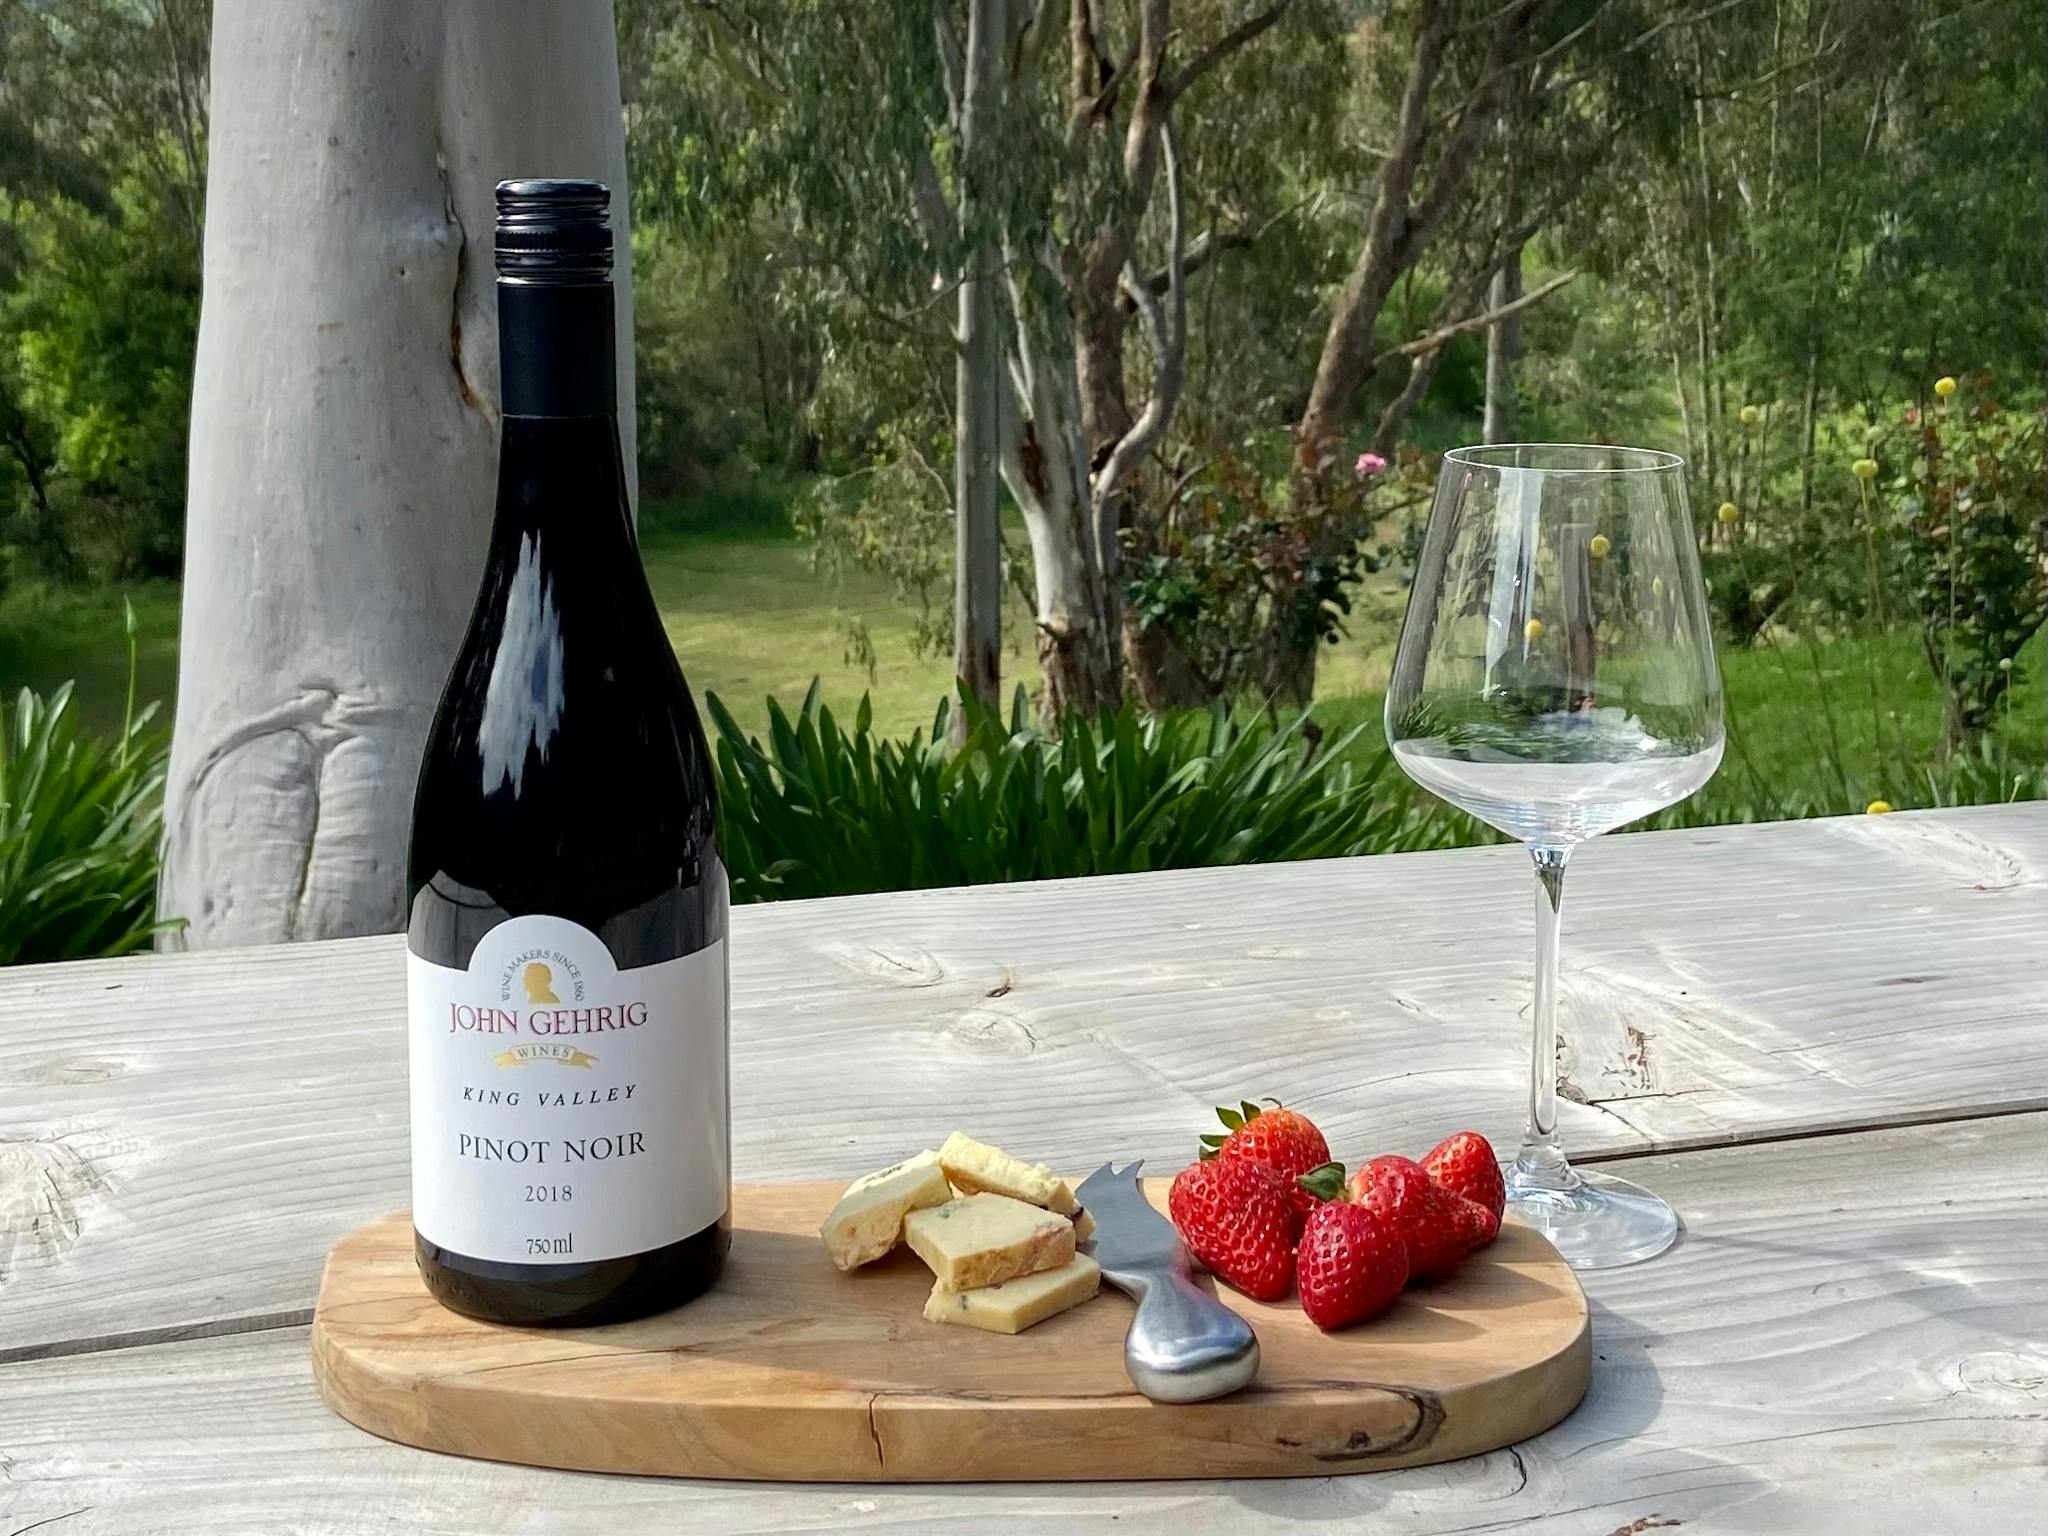 A bottle of King Valley Pinot Noir, outside with some cheese and strawberries.